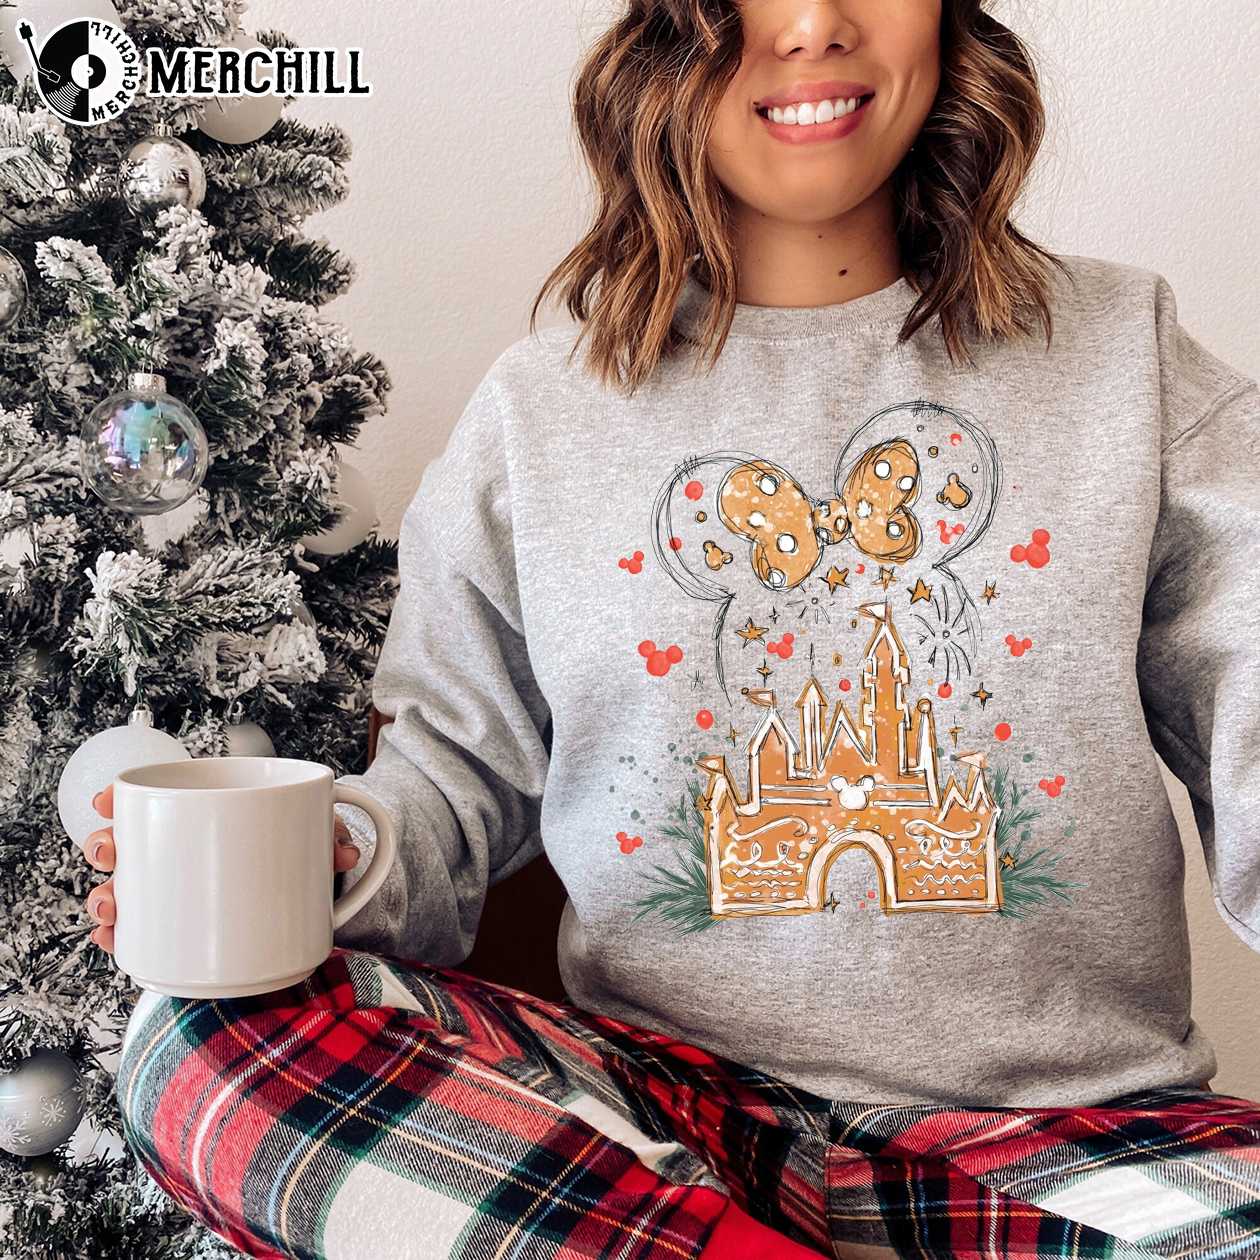 https://images.merchill.com/wp-content/uploads/2022/11/Minnie-Mouse-Christmas-Shirt-Disneyland-Christmas-Shirts-Gifts-for-Disney-Lovers-2.jpg